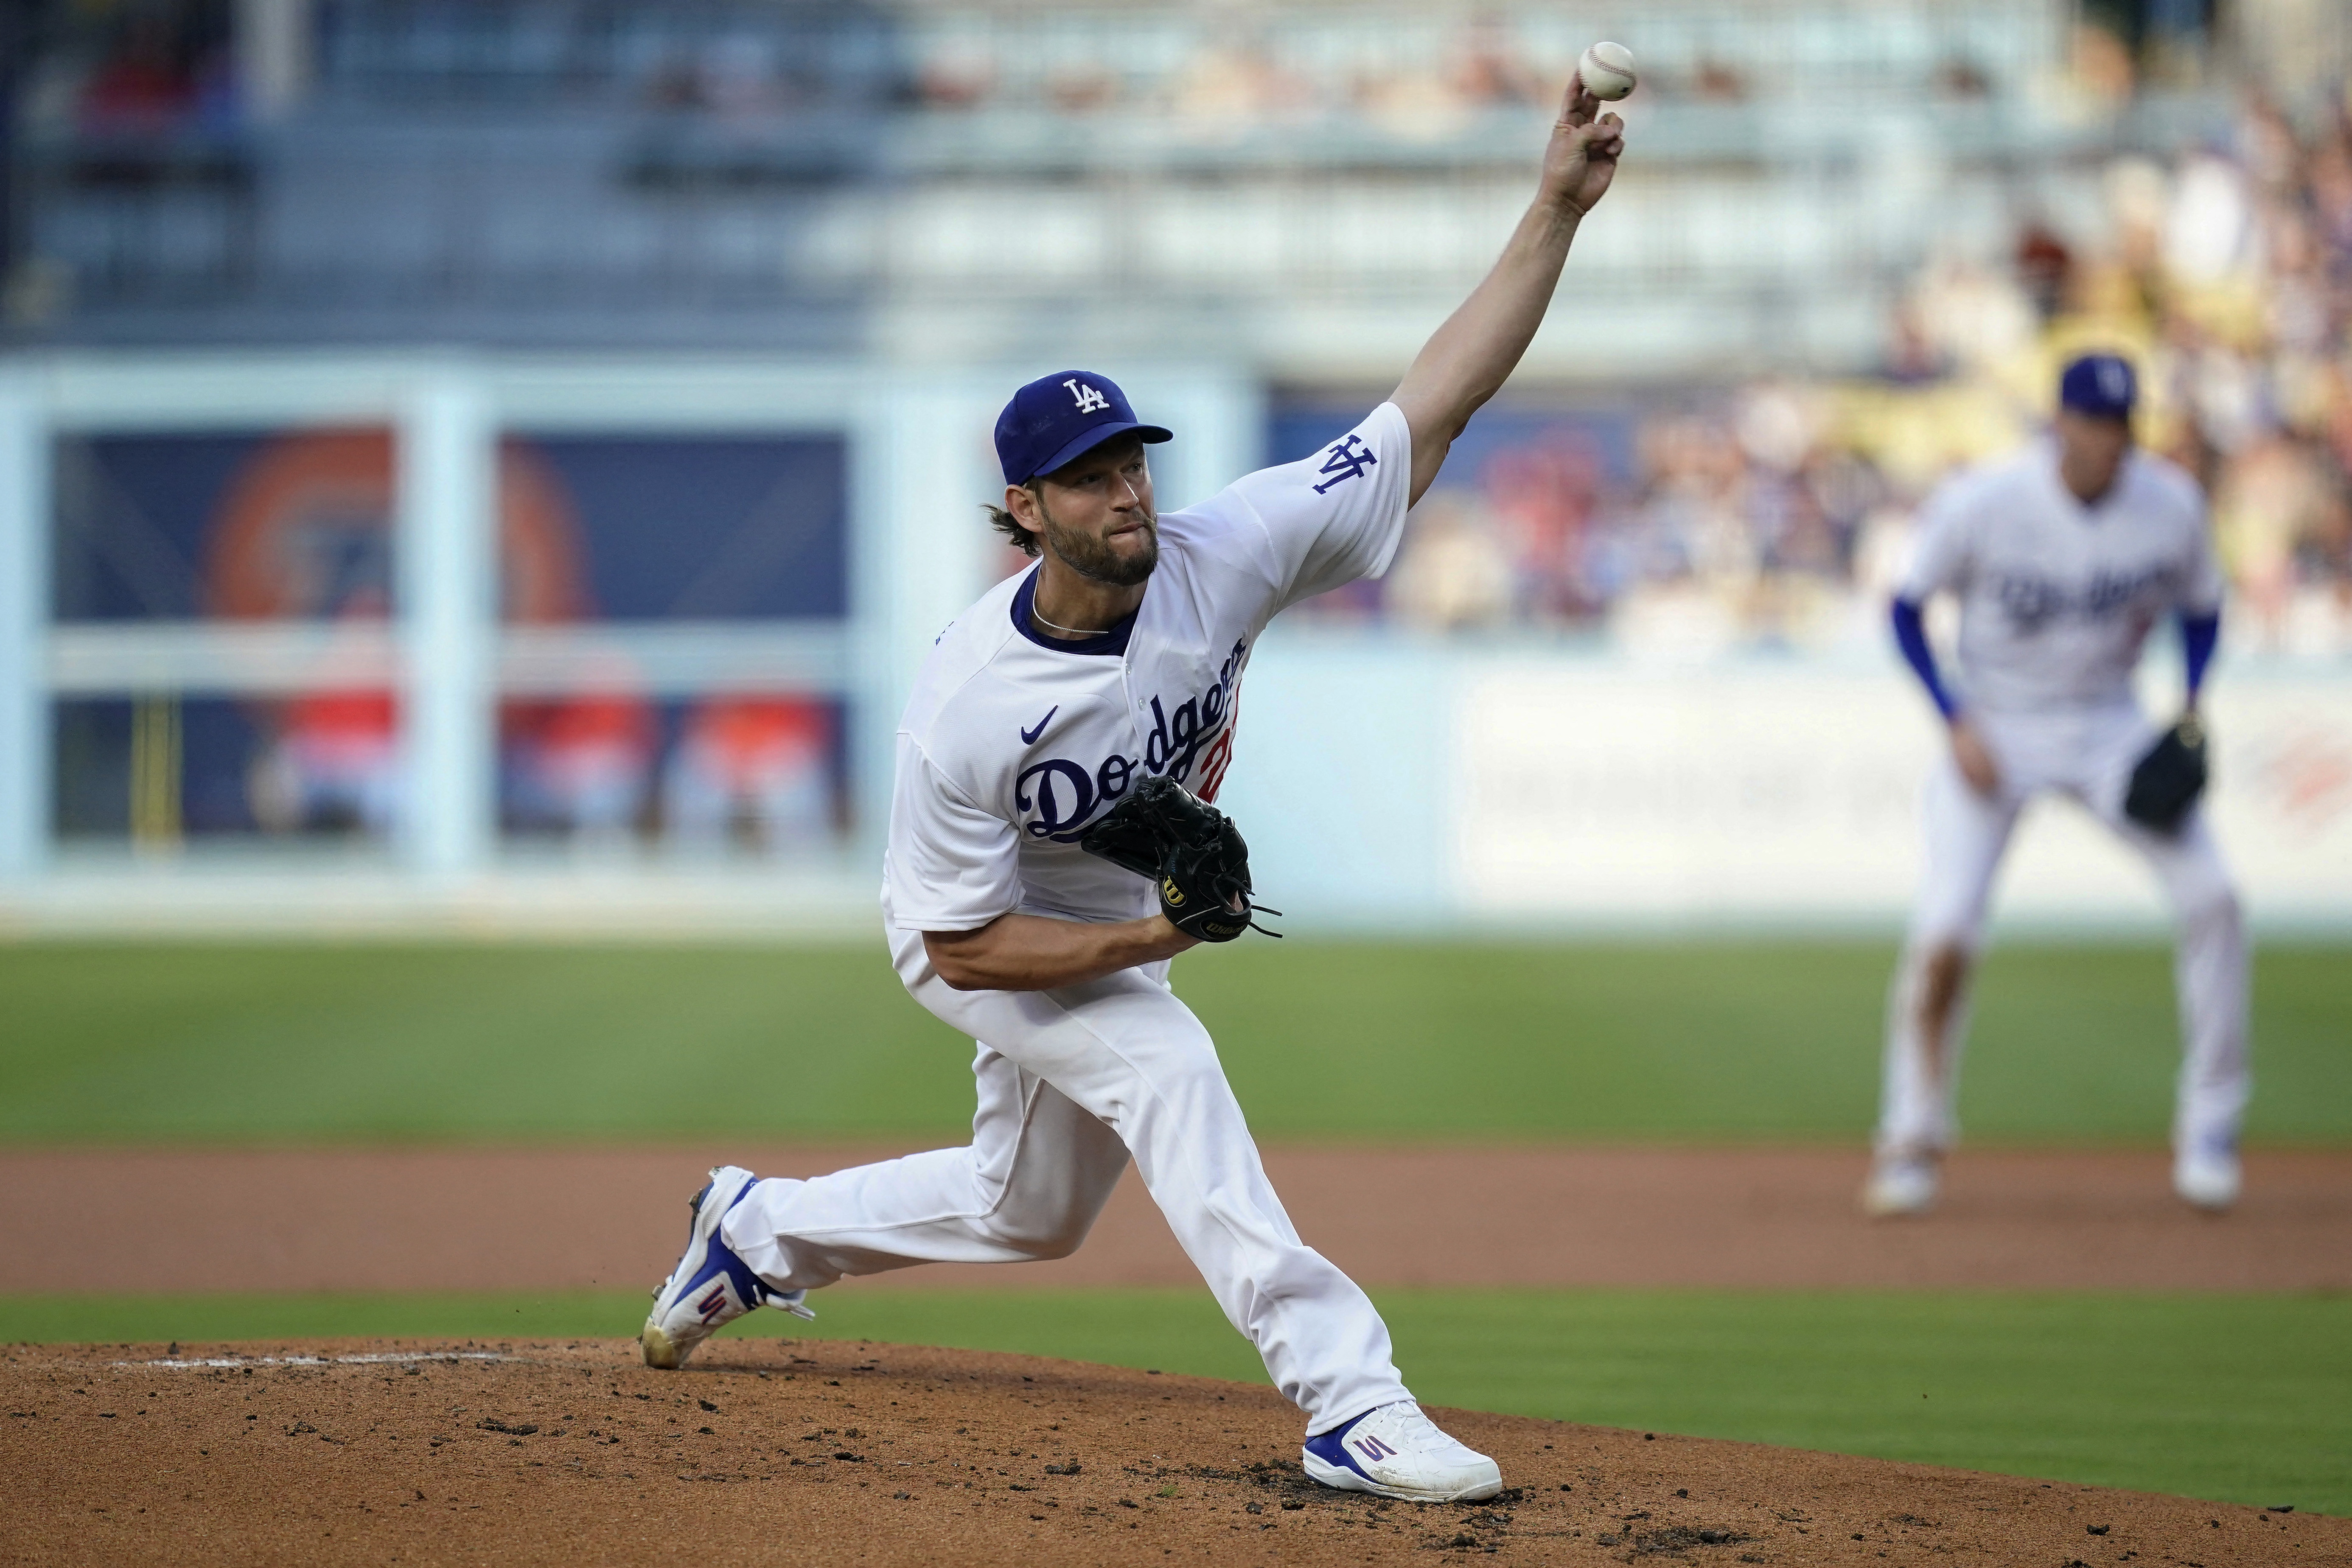 NLCS Game 1: Tracking Clayton Kershaw pitch by pitch to see how